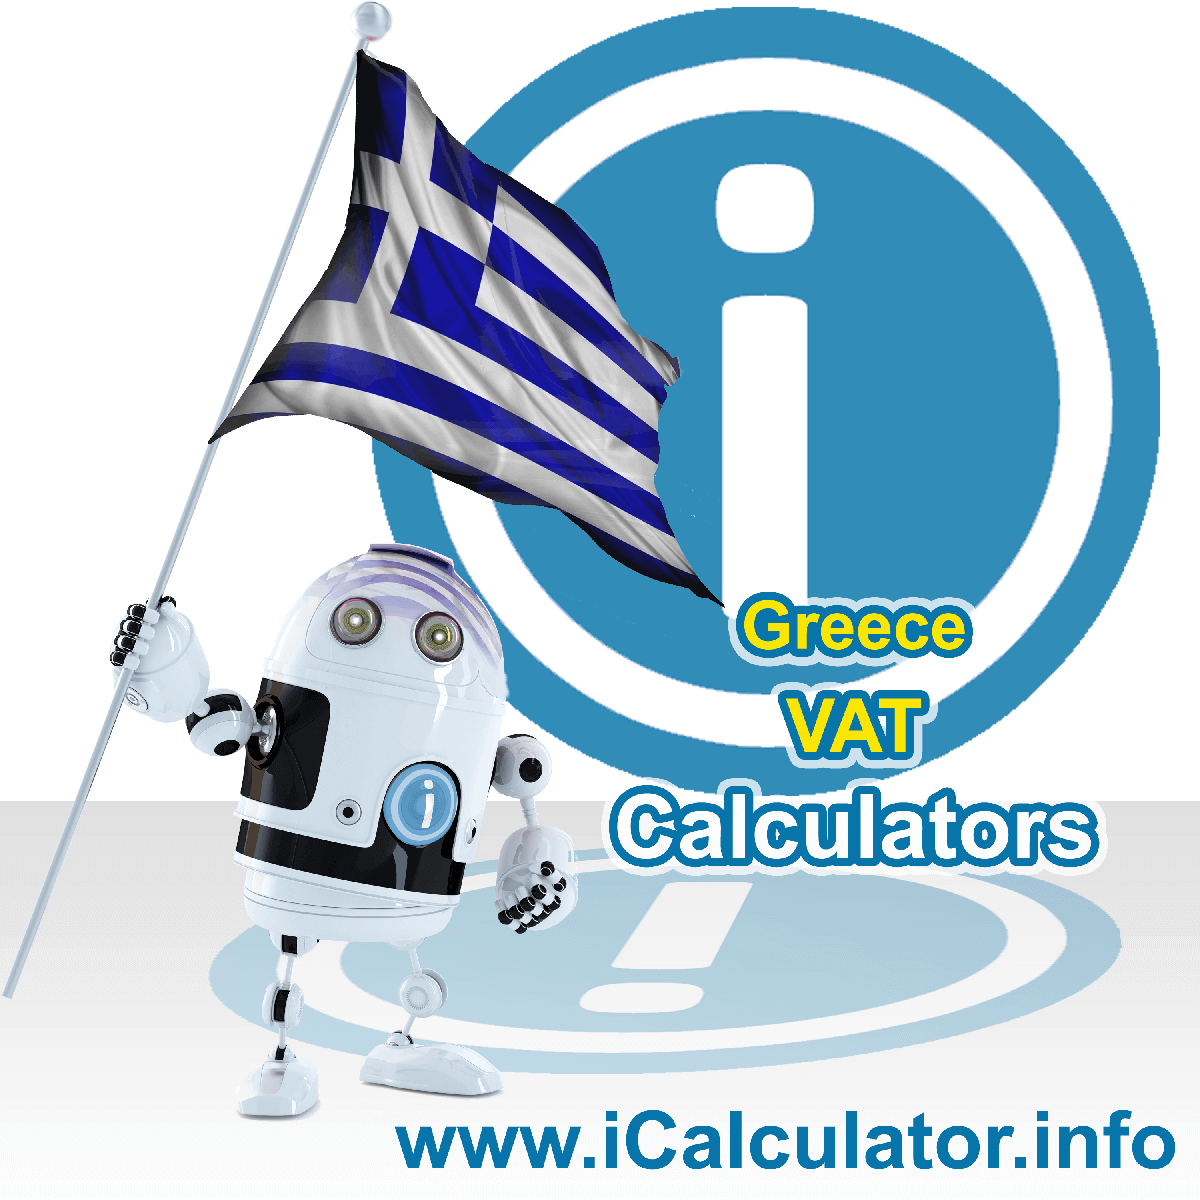 Greece VAT Calculator. This image shows the Greece flag and information relating to the VAT formula used for calculating Value Added Tax in Greece using the Greece VAT Calculator in 2023